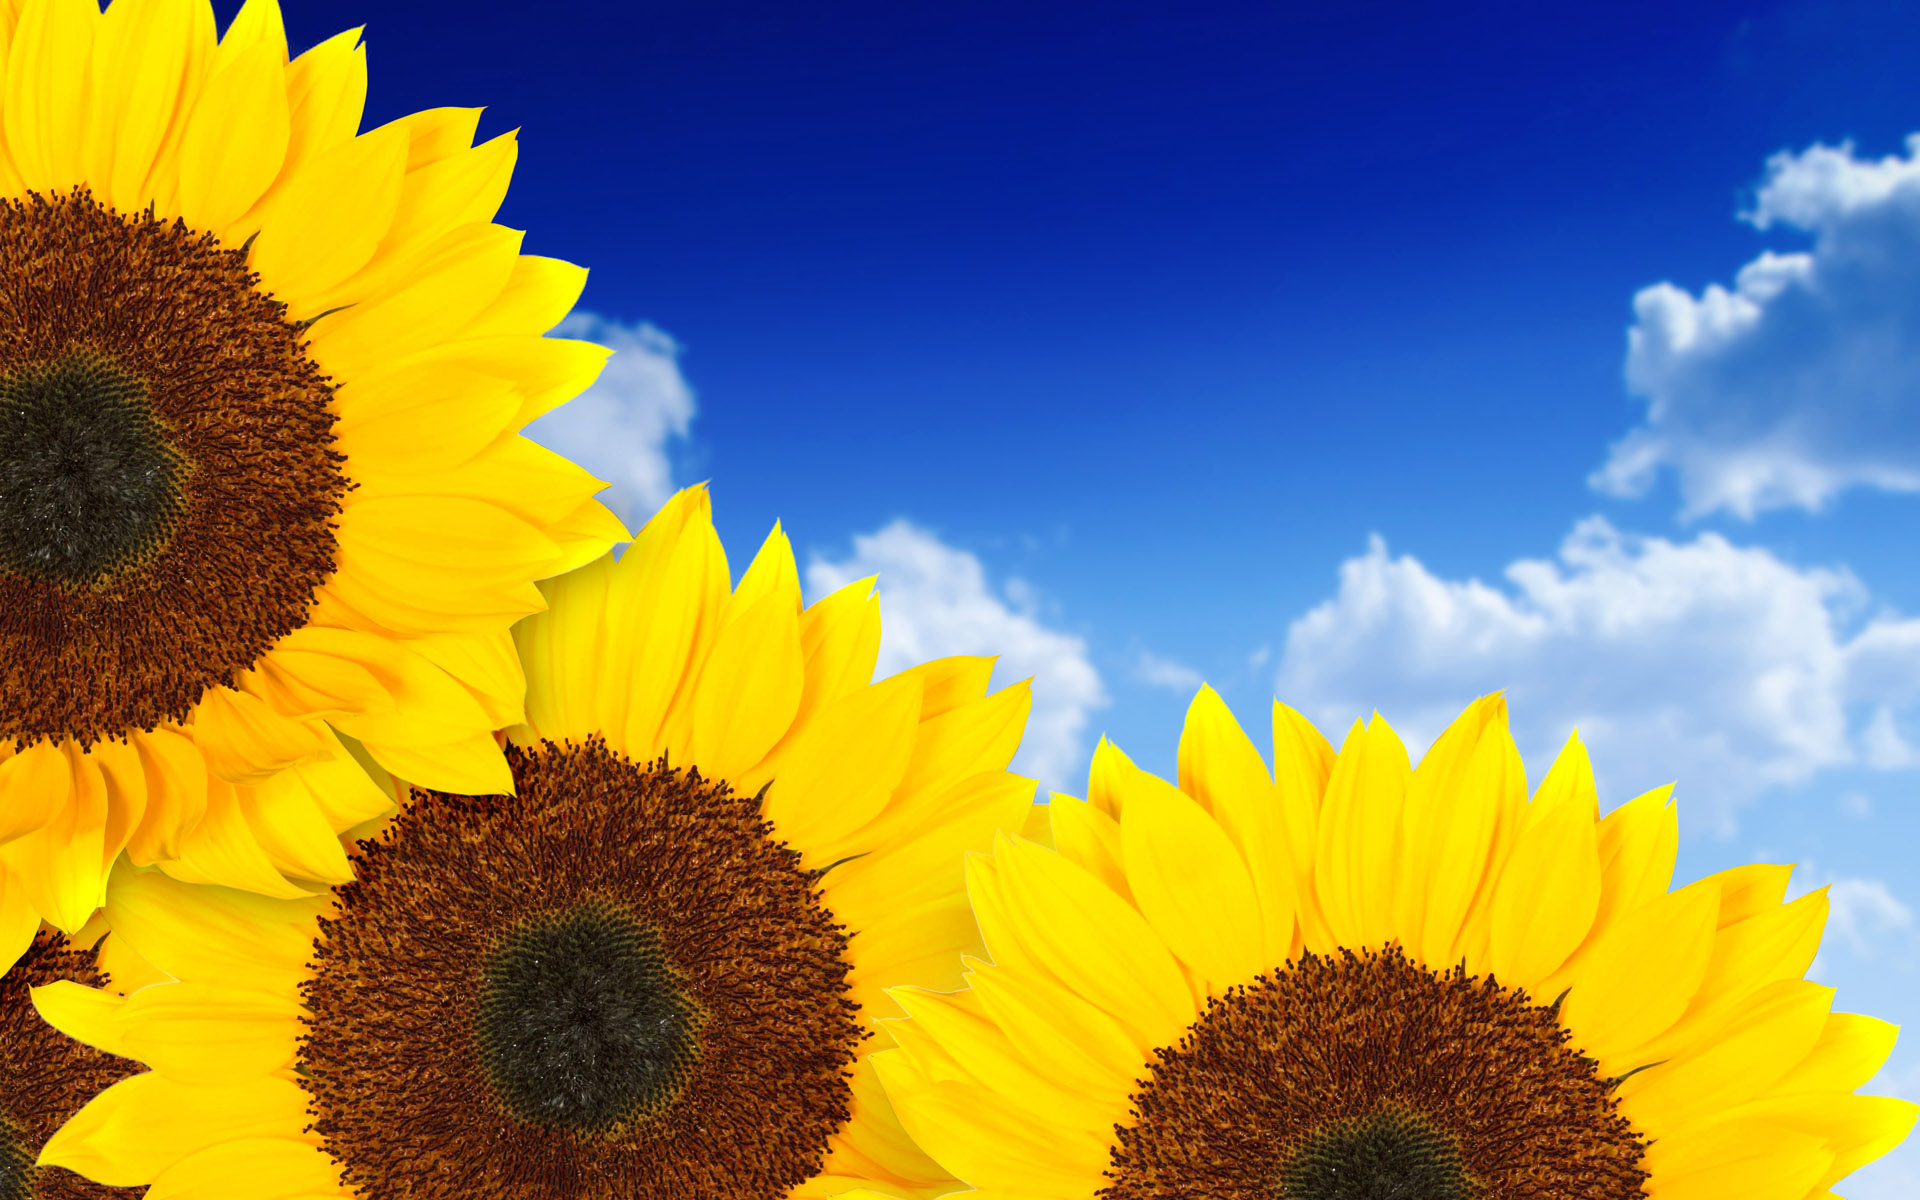 Wallpaper Of Sunflowers In The Blue Sky World